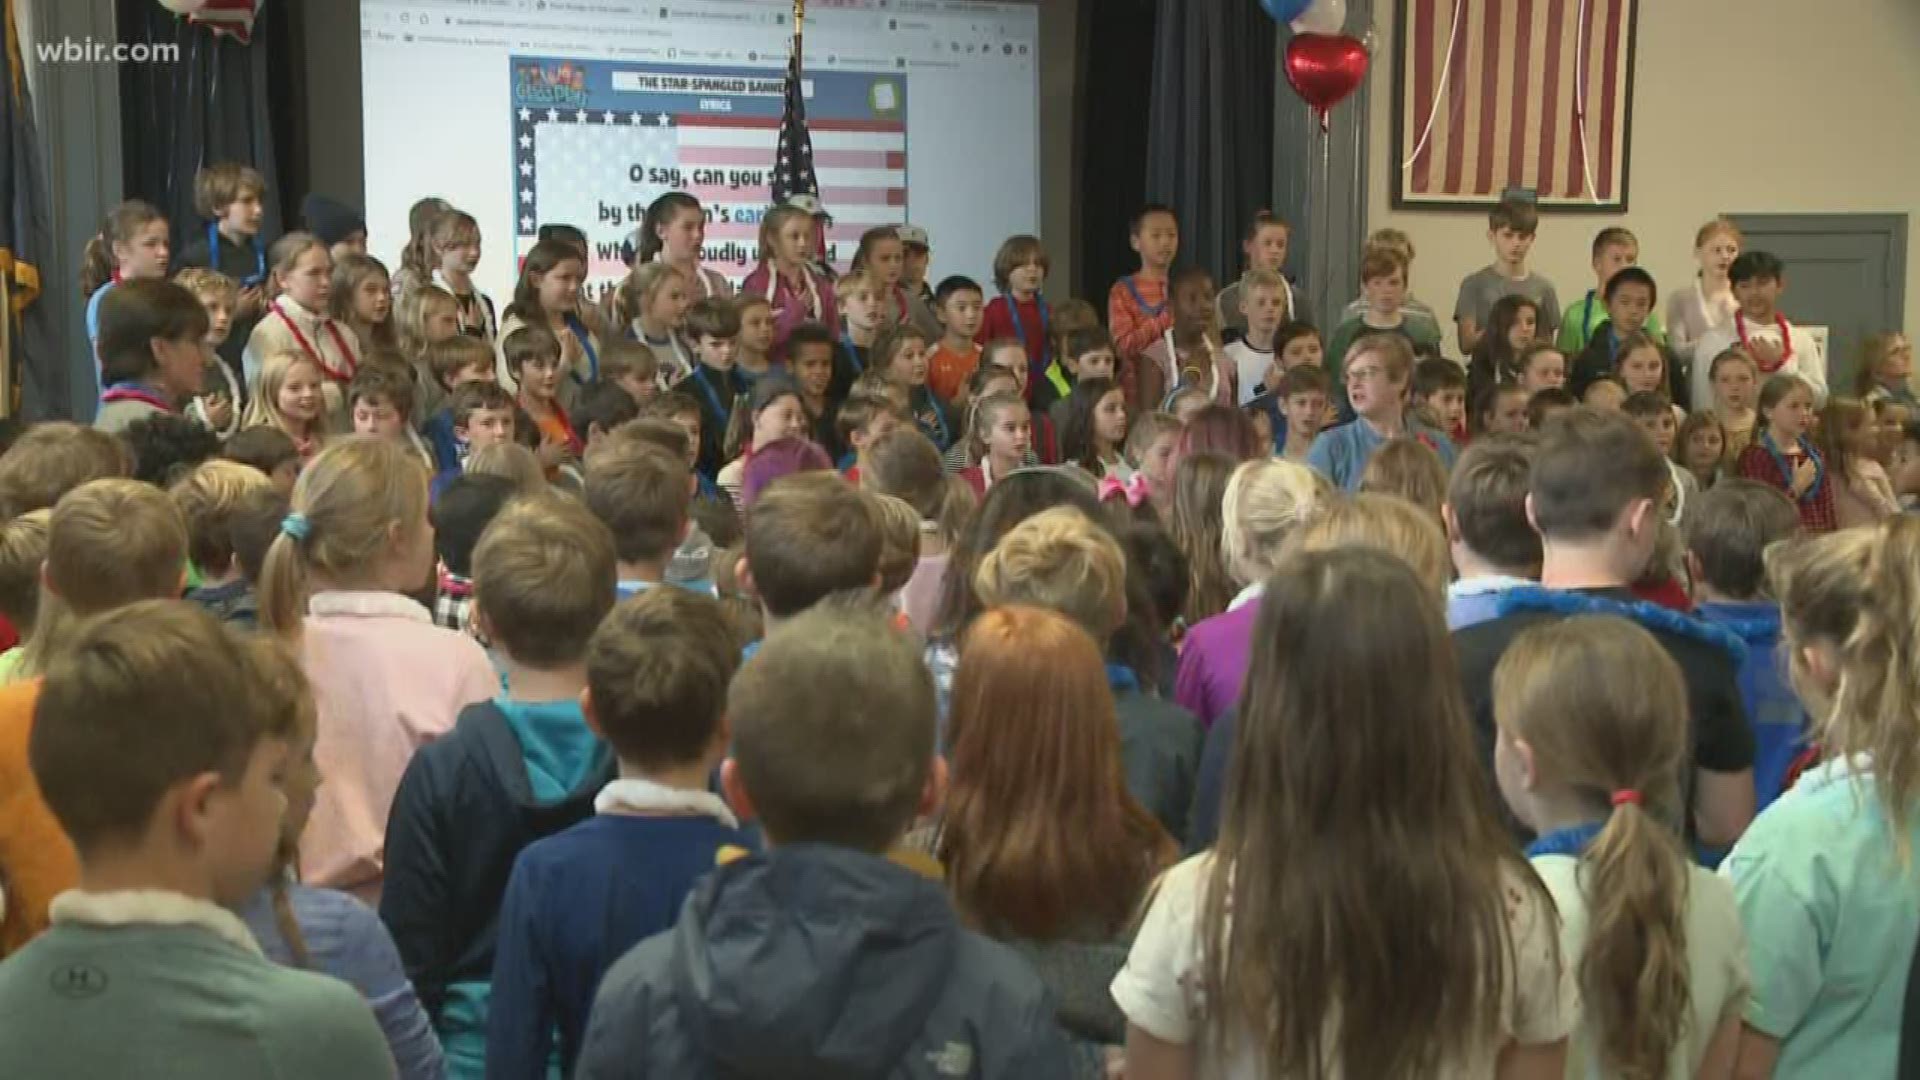 This afternoon, kids at Sequoyah Elementary held an event ahead of Veterans Day on Monday.